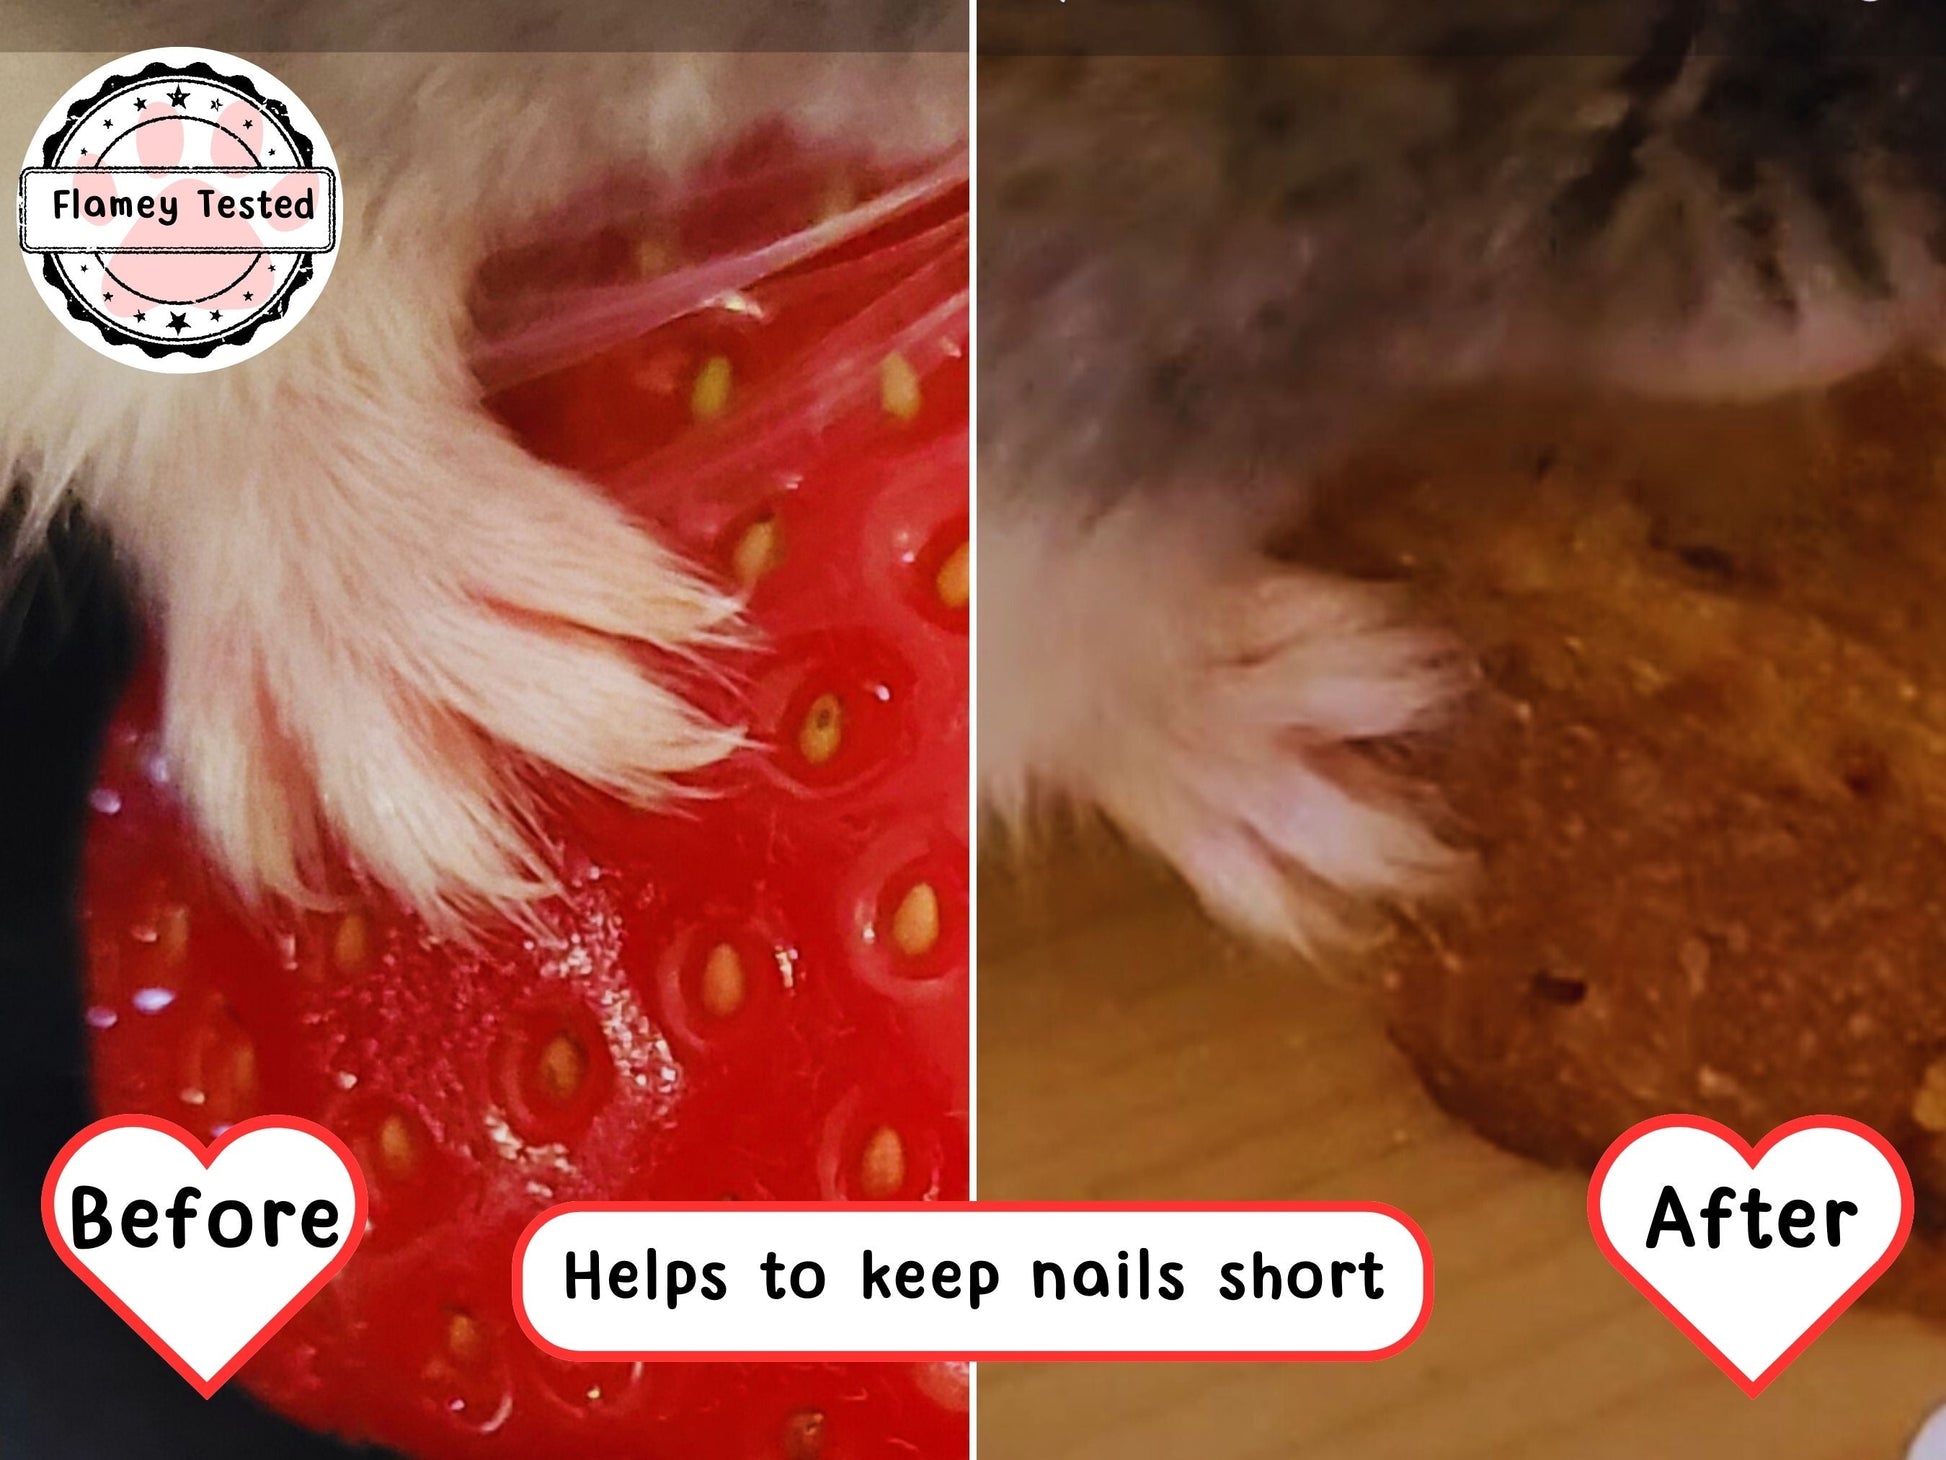 A before and after picture showing how the slate helps to reduce nail length in hamsters. In the first picture the hamsters nails are long and are shown against the background of a strawberry, in the second picture the nails are short and are shown with a toast background